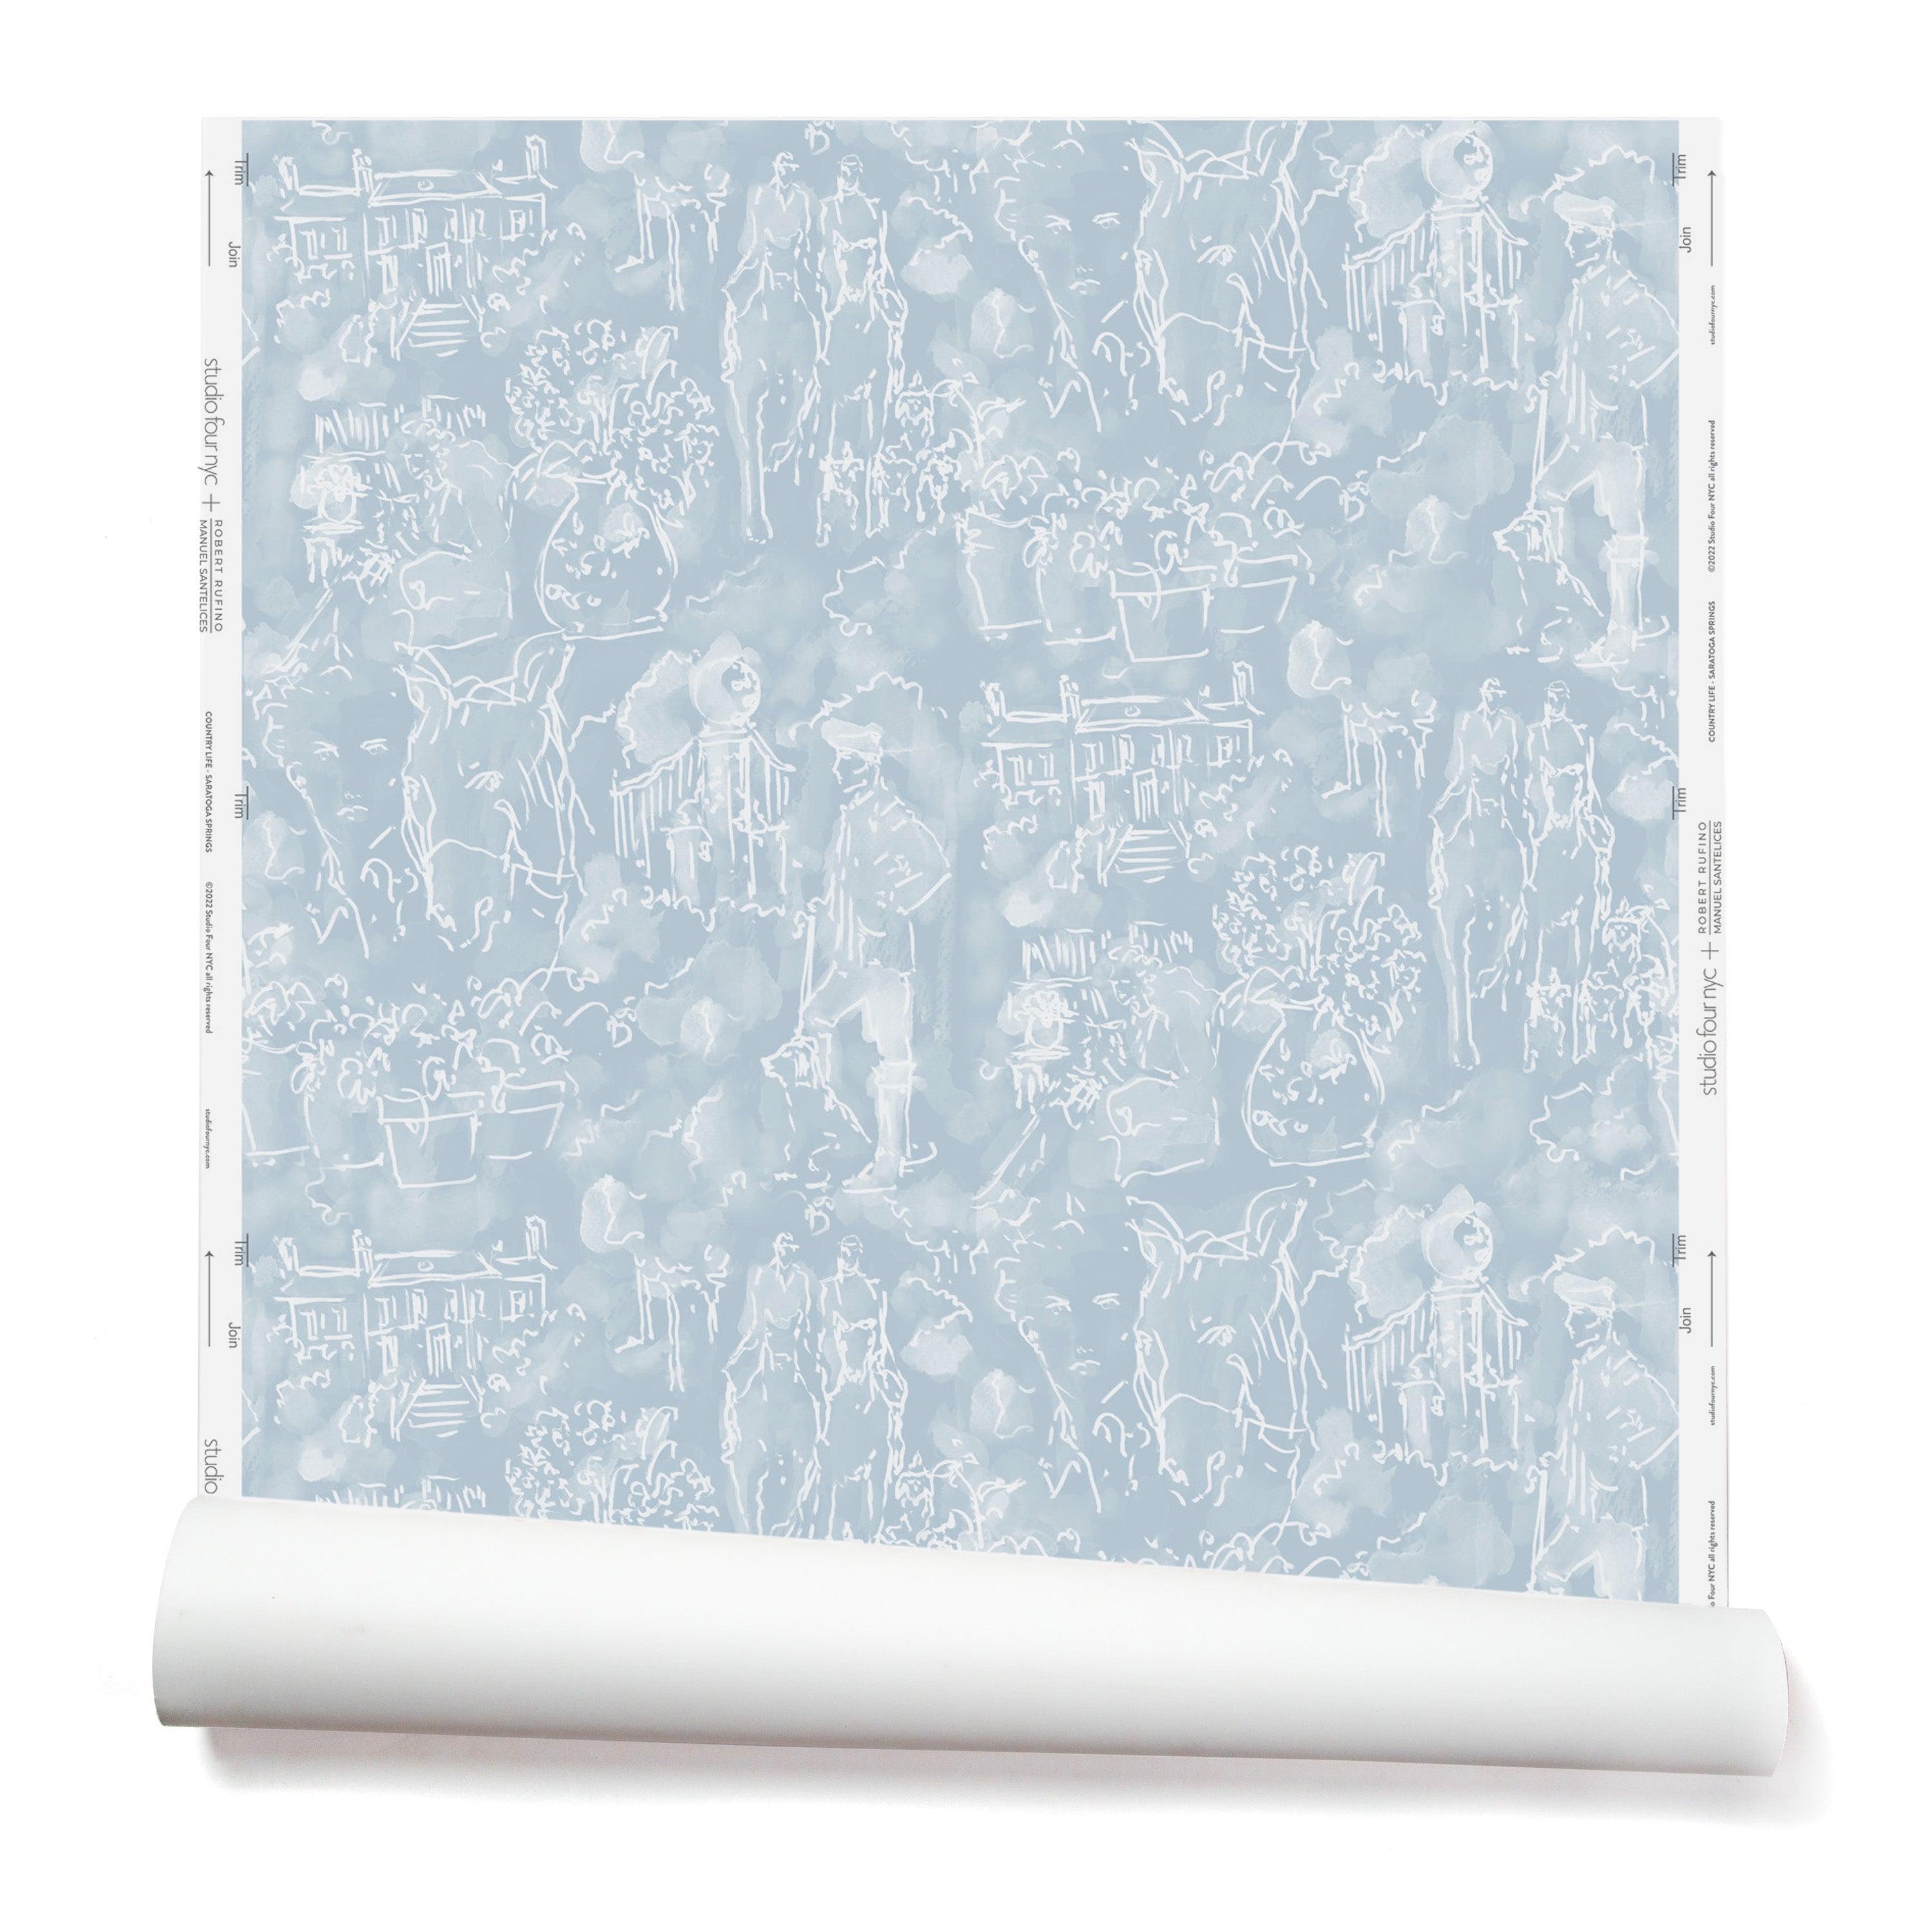 Partially unrolled wallpaper with a pattern of repeating watercolor illustrations of horses, farmers and country houses in white on a blue background.